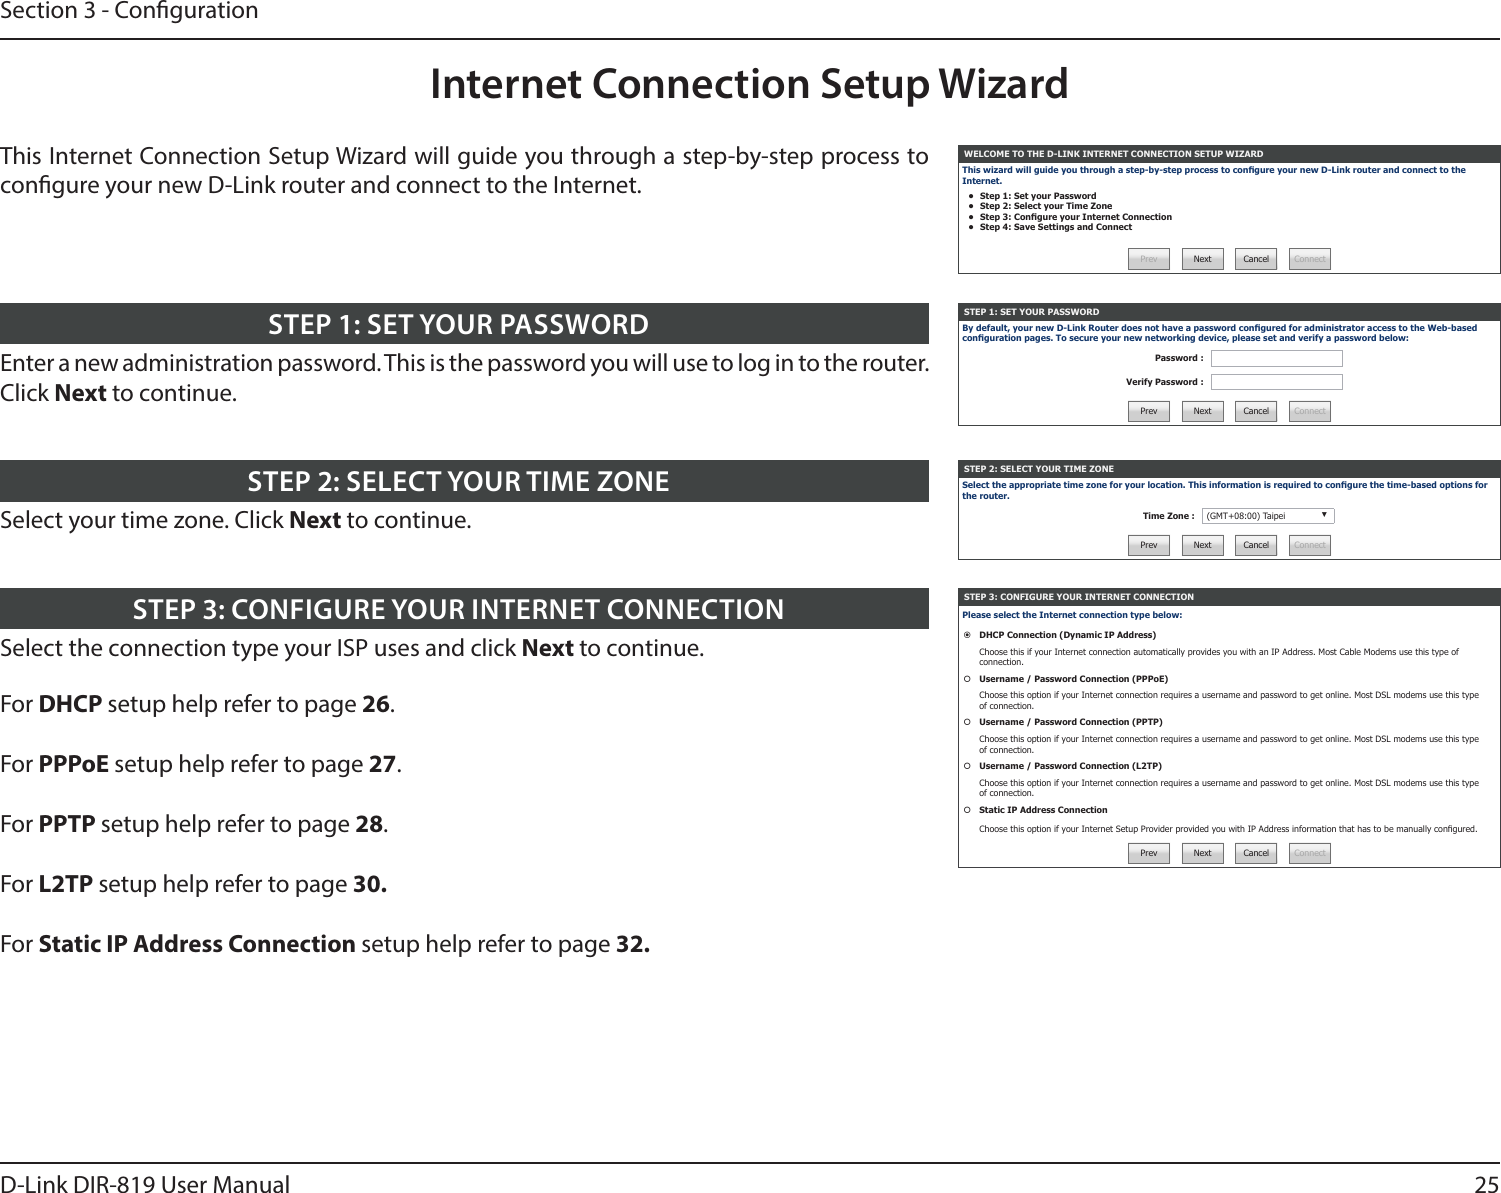 25D-Link DIR-819 User ManualSection 3 - CongurationInternet Connection Setup WizardWELCOME TO THE D-LINK INTERNET CONNECTION SETUP WIZARDThis wizard will guide you through a step-by-step process to congure your new D-Link router and connect to the Internet.•  Step 1: Set your Password•  Step 2: Select your Time Zone•  Step 3: Congure your Internet Connection•  Step 4: Save Settings and ConnectPrev Next Cancel ConnectSTEP 1: SET YOUR PASSWORDBy default, your new D-Link Router does not have a password congured for administrator access to the Web-based conguration pages. To secure your new networking device, please set and verify a password below:Password :Verify Password :Prev Next Cancel ConnectSTEP 2: SELECT YOUR TIME ZONESelect the appropriate time zone for your location. This information is required to congure the time-based options for the router.Time Zone : (GMT+08:00) Taipei ▼Prev Next Cancel ConnectSTEP 3: CONFIGURE YOUR INTERNET CONNECTIONPlease select the Internet connection type below:DHCP Connection (Dynamic IP Address)Choose this if your Internet connection automatically provides you with an IP Address. Most Cable Modems use this type of connection.Username / Password Connection (PPPoE)Choose this option if your Internet connection requires a username and password to get online. Most DSL modems use this type of connection.Username / Password Connection (PPTP)Choose this option if your Internet connection requires a username and password to get online. Most DSL modems use this type of connection.Username / Password Connection (L2TP)Choose this option if your Internet connection requires a username and password to get online. Most DSL modems use this type of connection.Static IP Address ConnectionChoose this option if your Internet Setup Provider provided you with IP Address information that has to be manually congured.Prev Next Cancel ConnectThis Internet Connection Setup Wizard will guide you through a step-by-step process to congure your new D-Link router and connect to the Internet.Enter a new administration password. This is the password you will use to log in to the router. Click Next to continue.STEP 1: SET YOUR PASSWORDSelect your time zone. Click Next to continue.STEP 2: SELECT YOUR TIME ZONESelect the connection type your ISP uses and click Next to continue.For DHCP setup help refer to page 26.For PPPoE setup help refer to page 27.For PPTP setup help refer to page 28.For L2TP setup help refer to page 30.For Static IP Address Connection setup help refer to page 32.STEP 3: CONFIGURE YOUR INTERNET CONNECTION